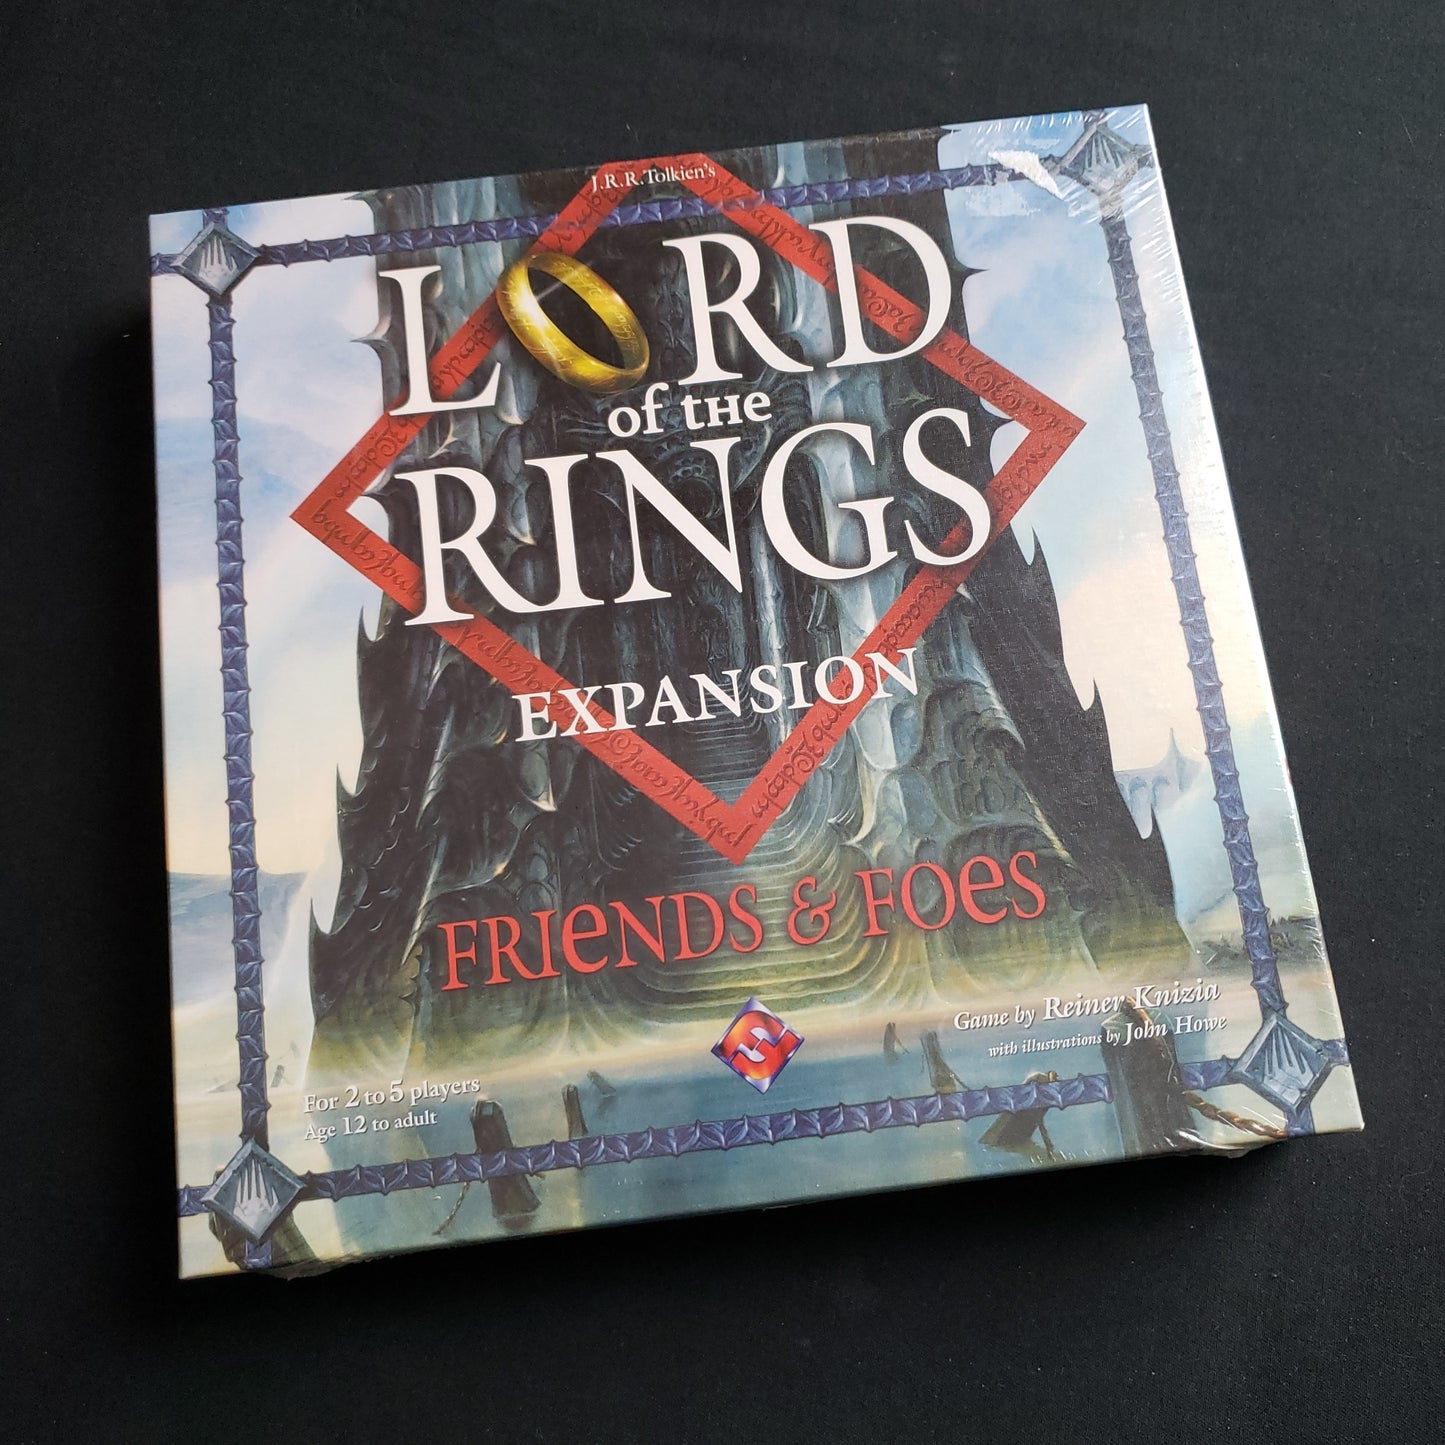 Image shows the front of the box for the Friends & Foes Expansion for the Lord of the Rings board game